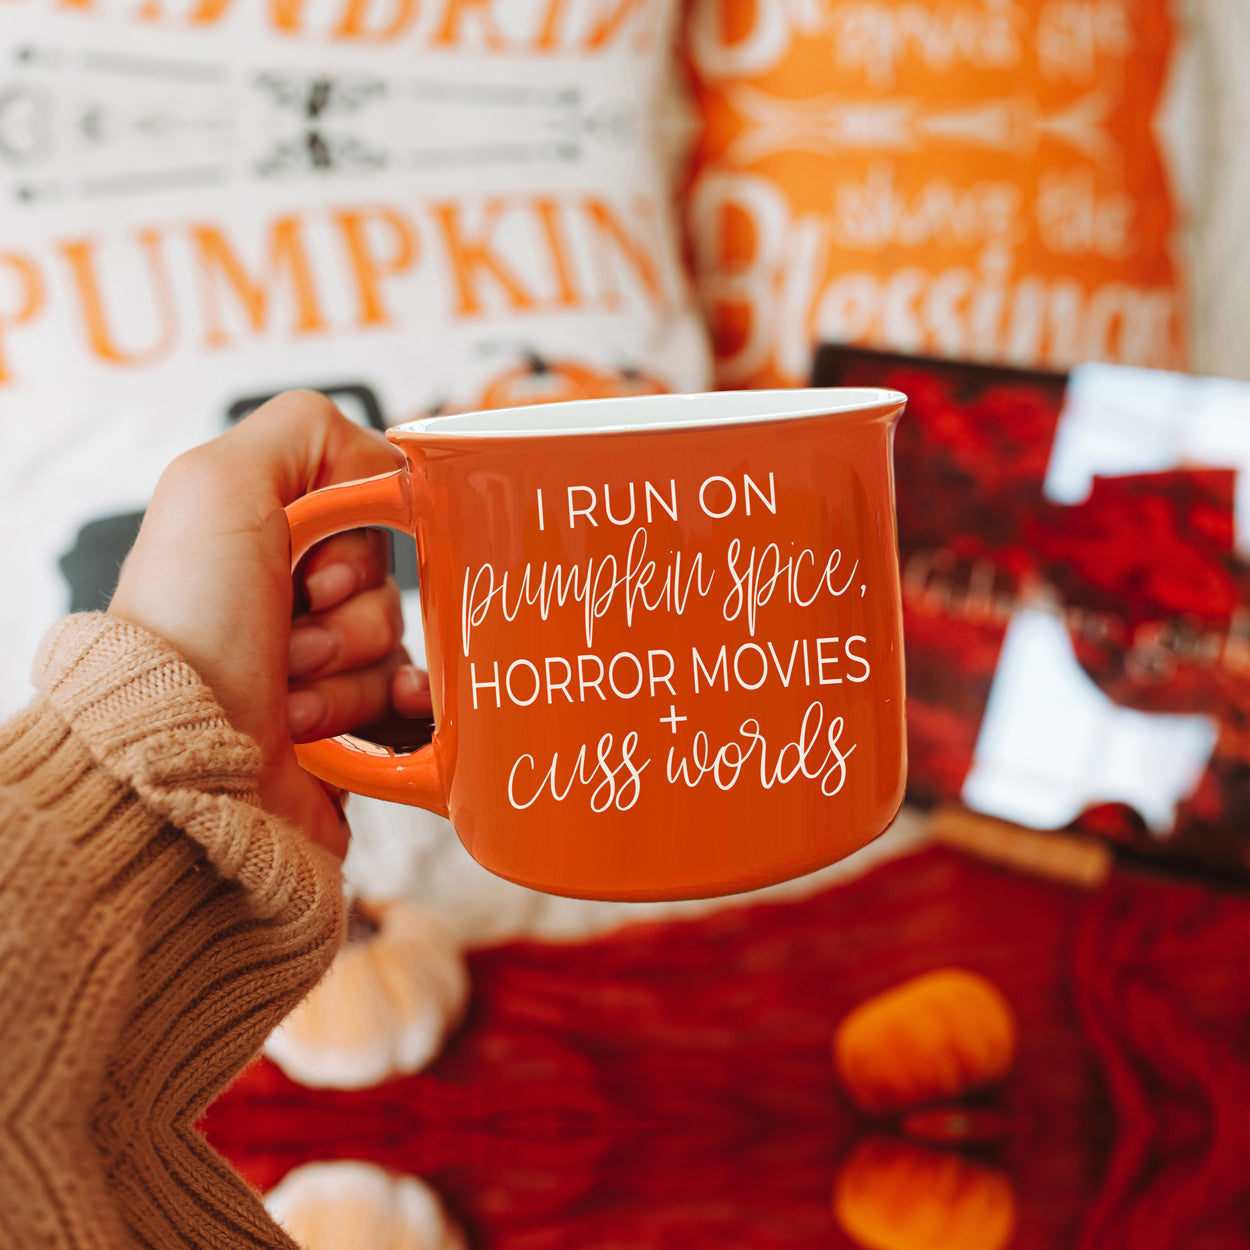 I run on pumpkin spice, horror movies and cuss words cup